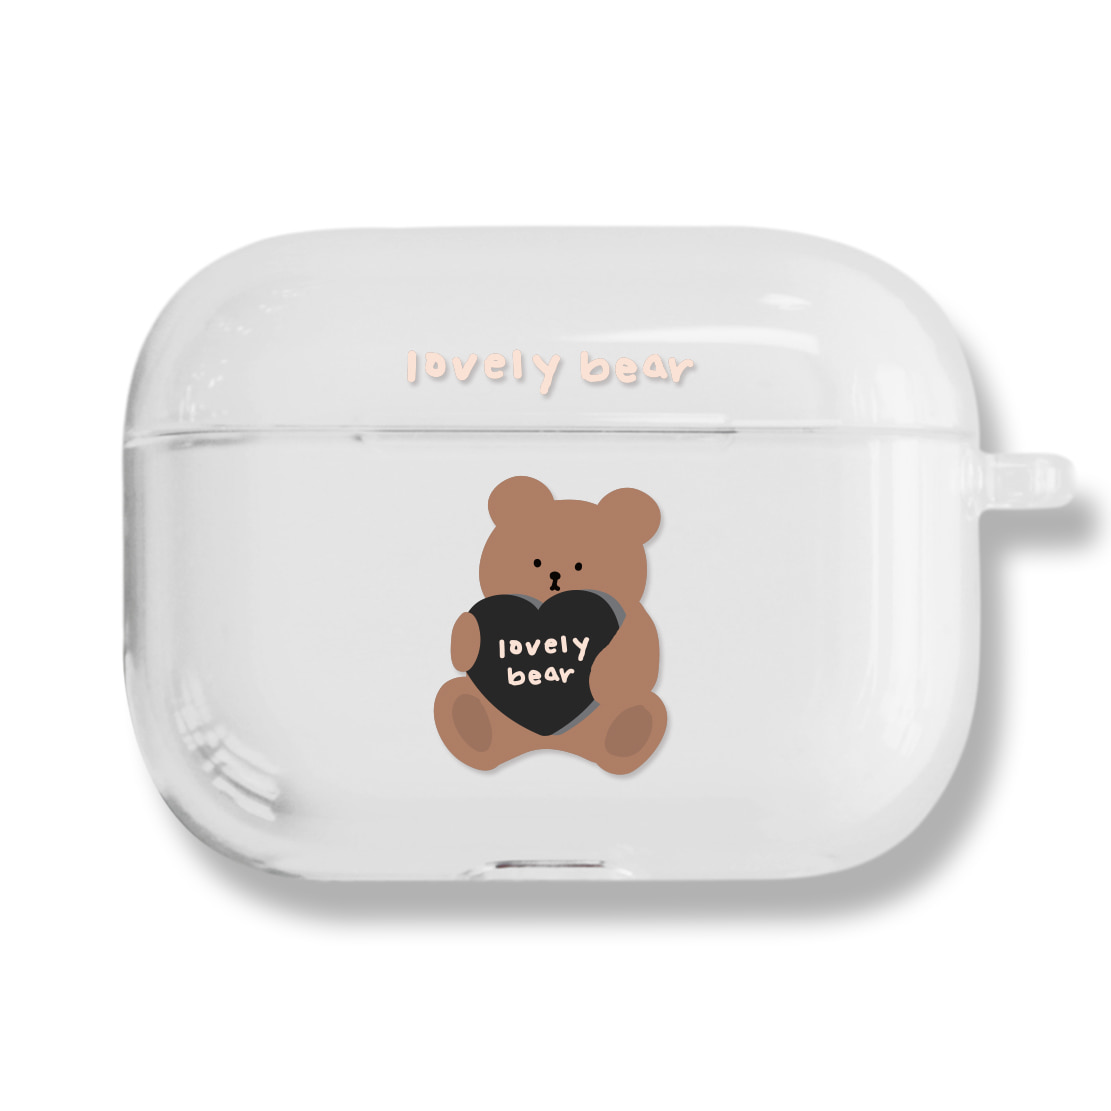 [CLEAR AIRPODS PRO] 595 Teddy베어(블랙)